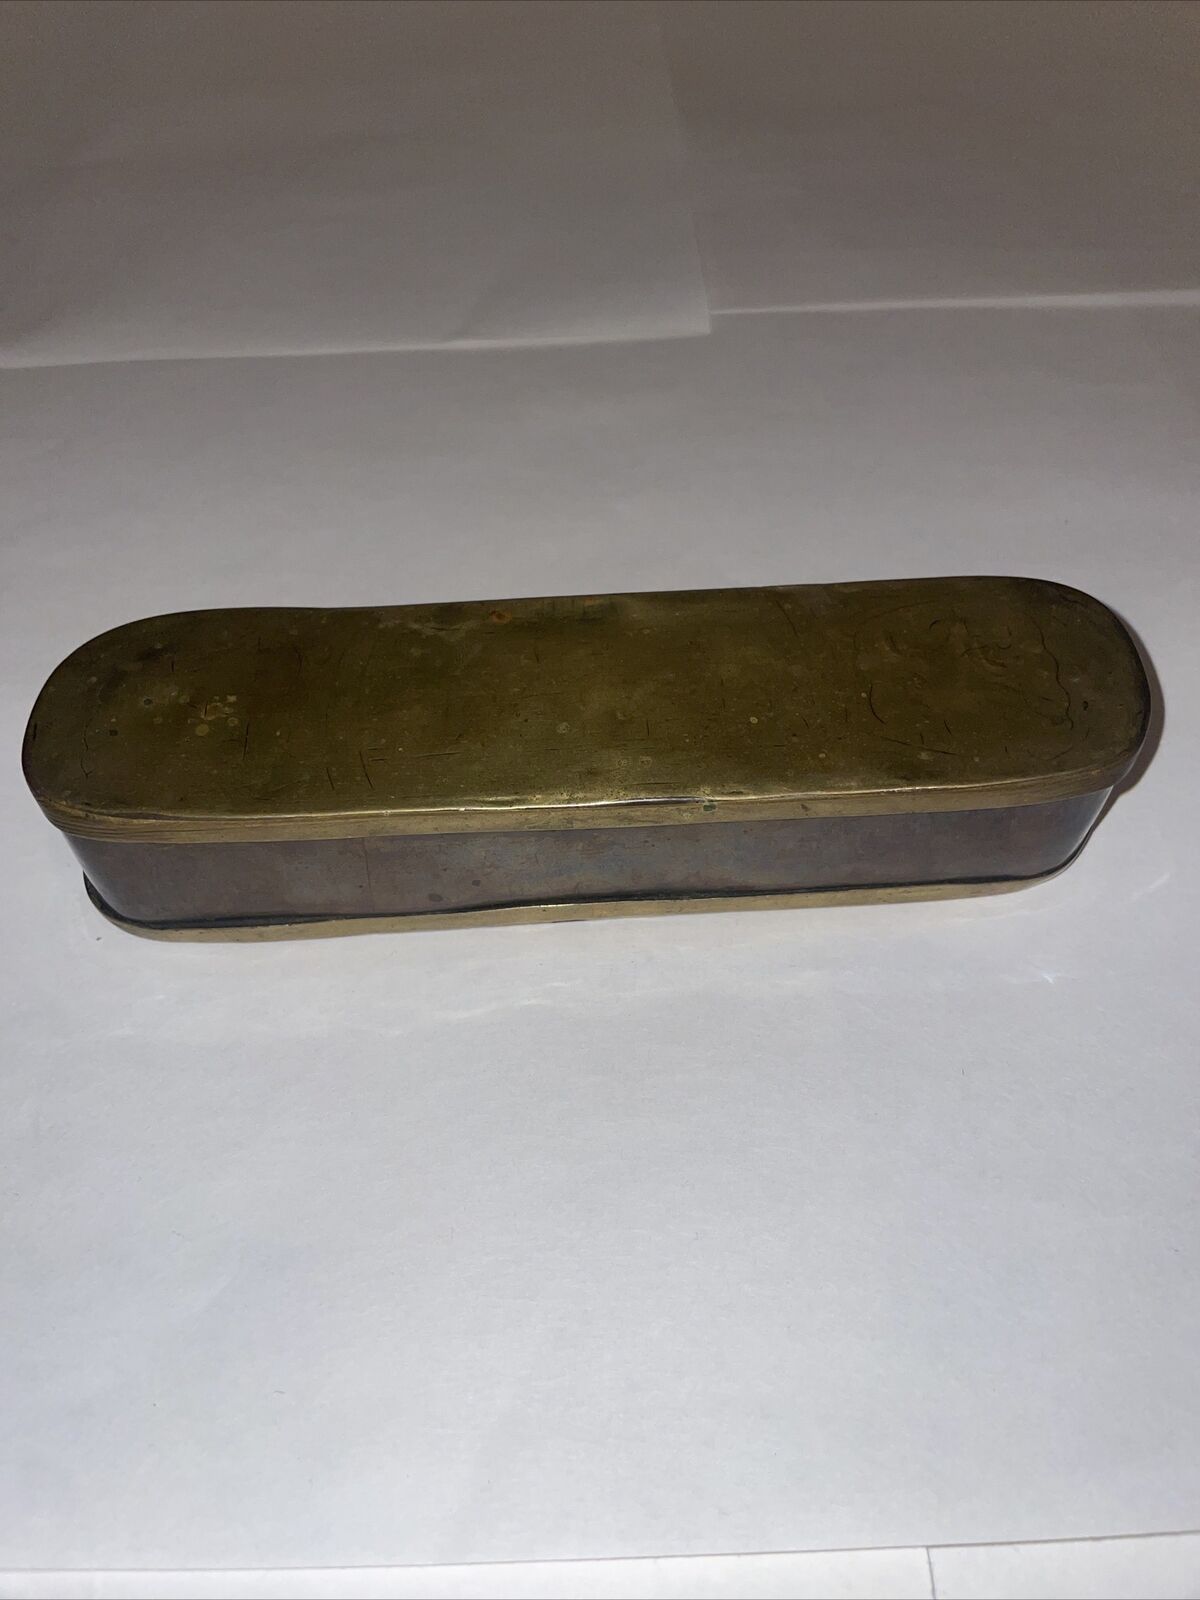 Antique Dutch Brass & Copper Tobacco/snuff Box - Engraved Top And Bottom 18th C